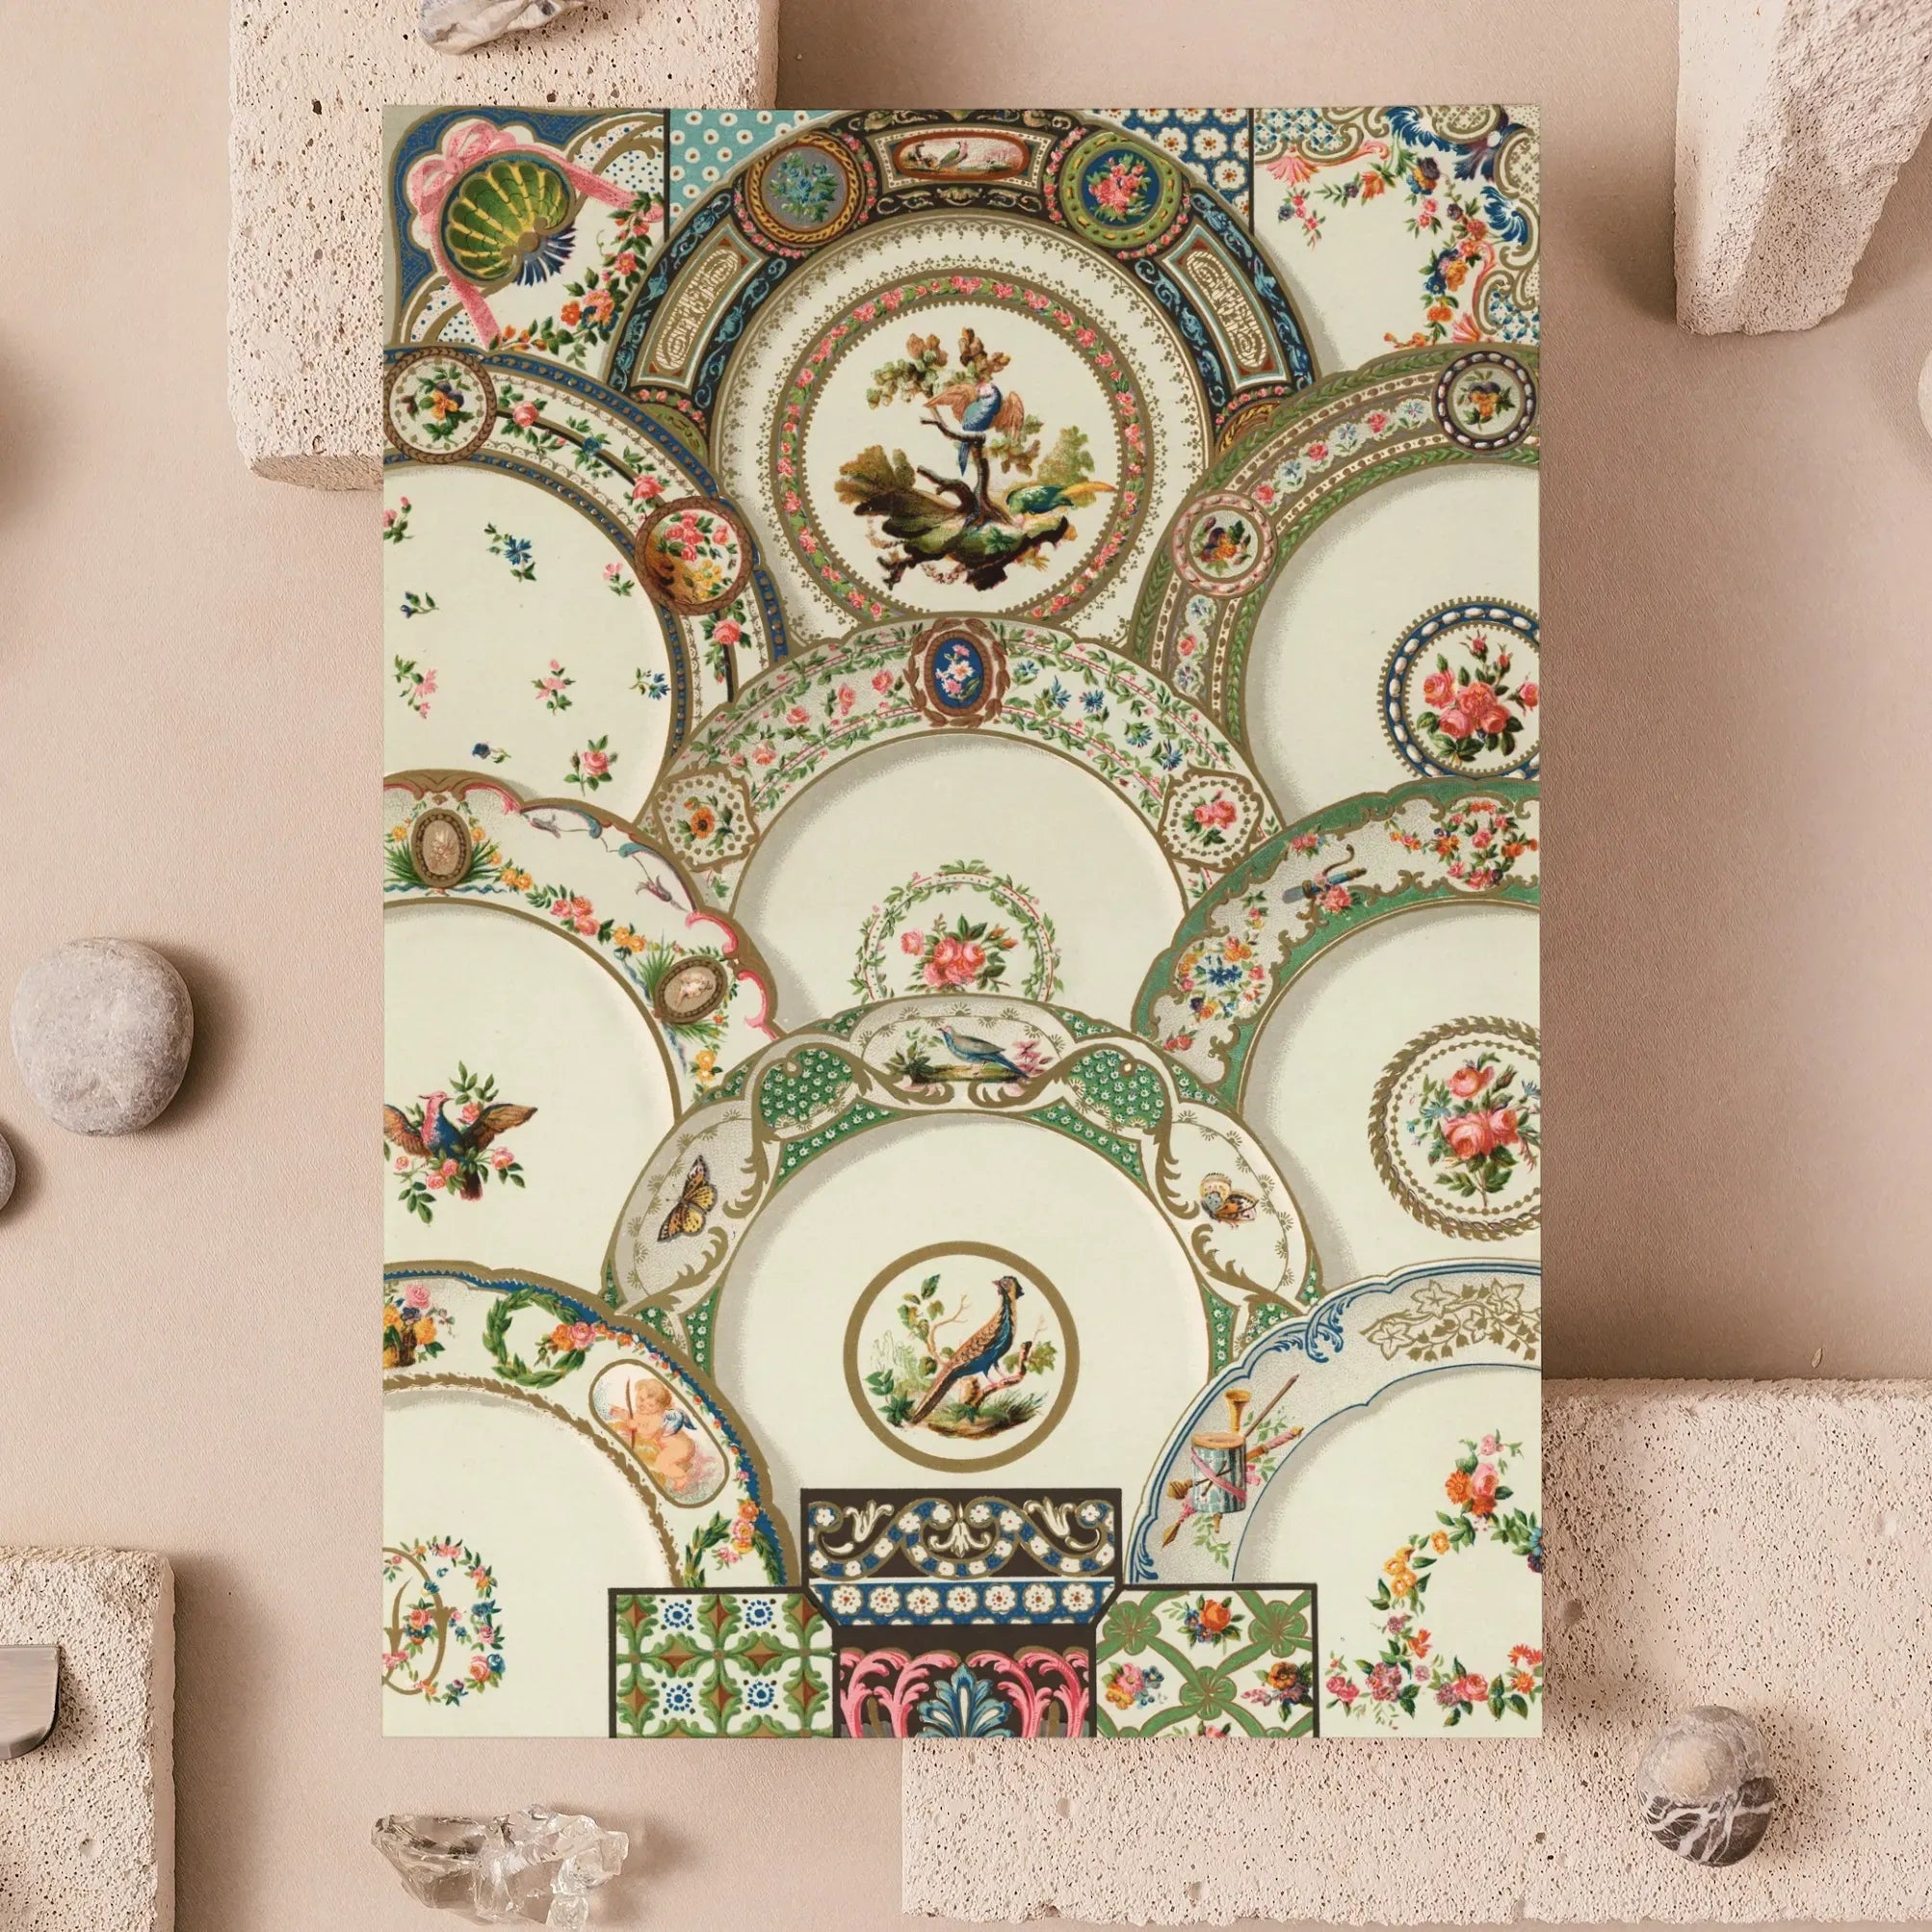 Decorative Plates By Auguste Racinet Greeting Card - Greeting & Note Cards - Aesthetic Art